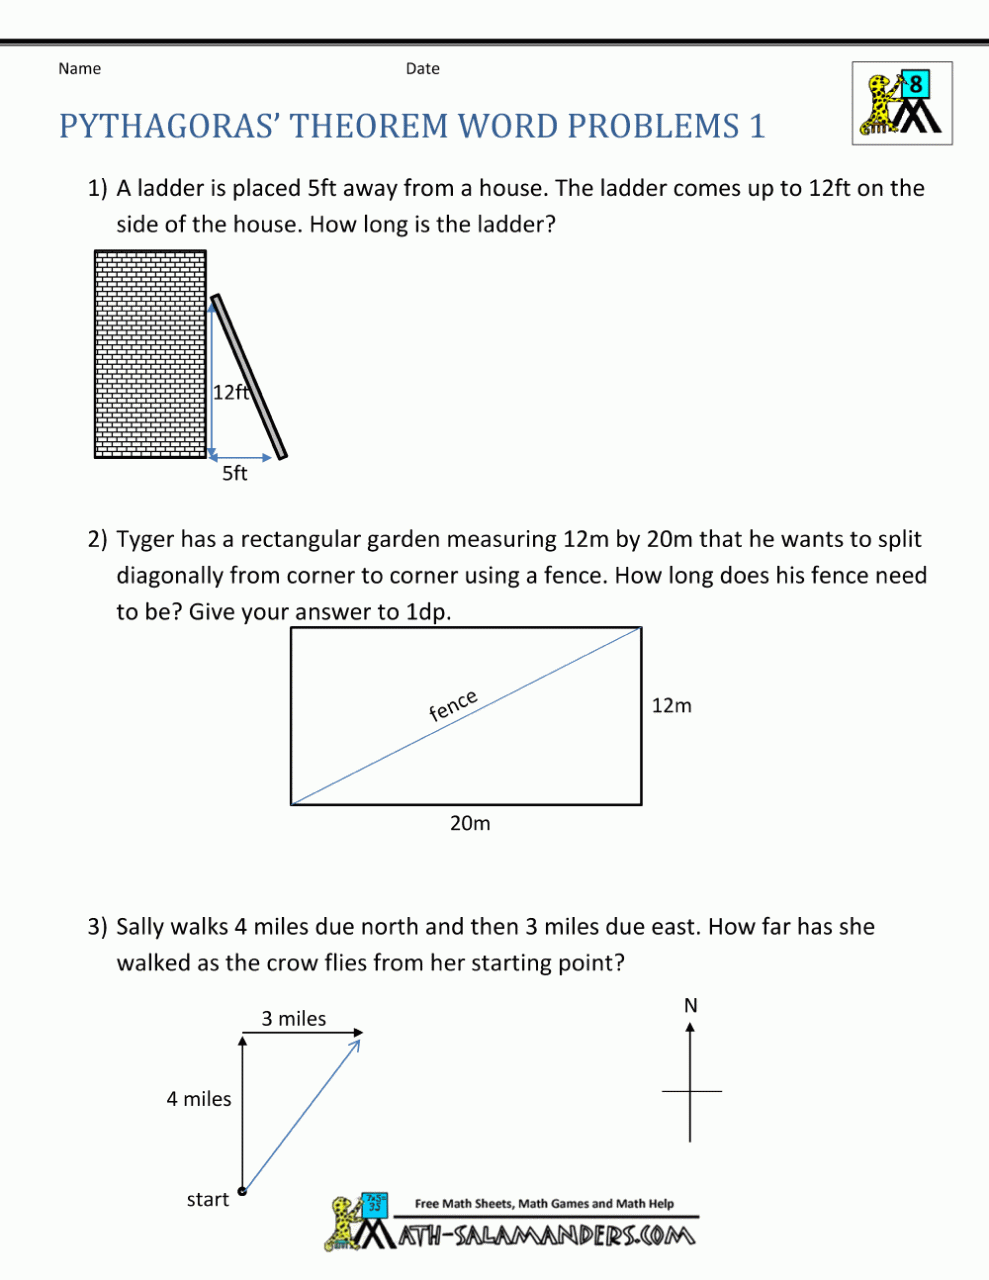 Pythagorean Theorem Problems Worksheet With Answers